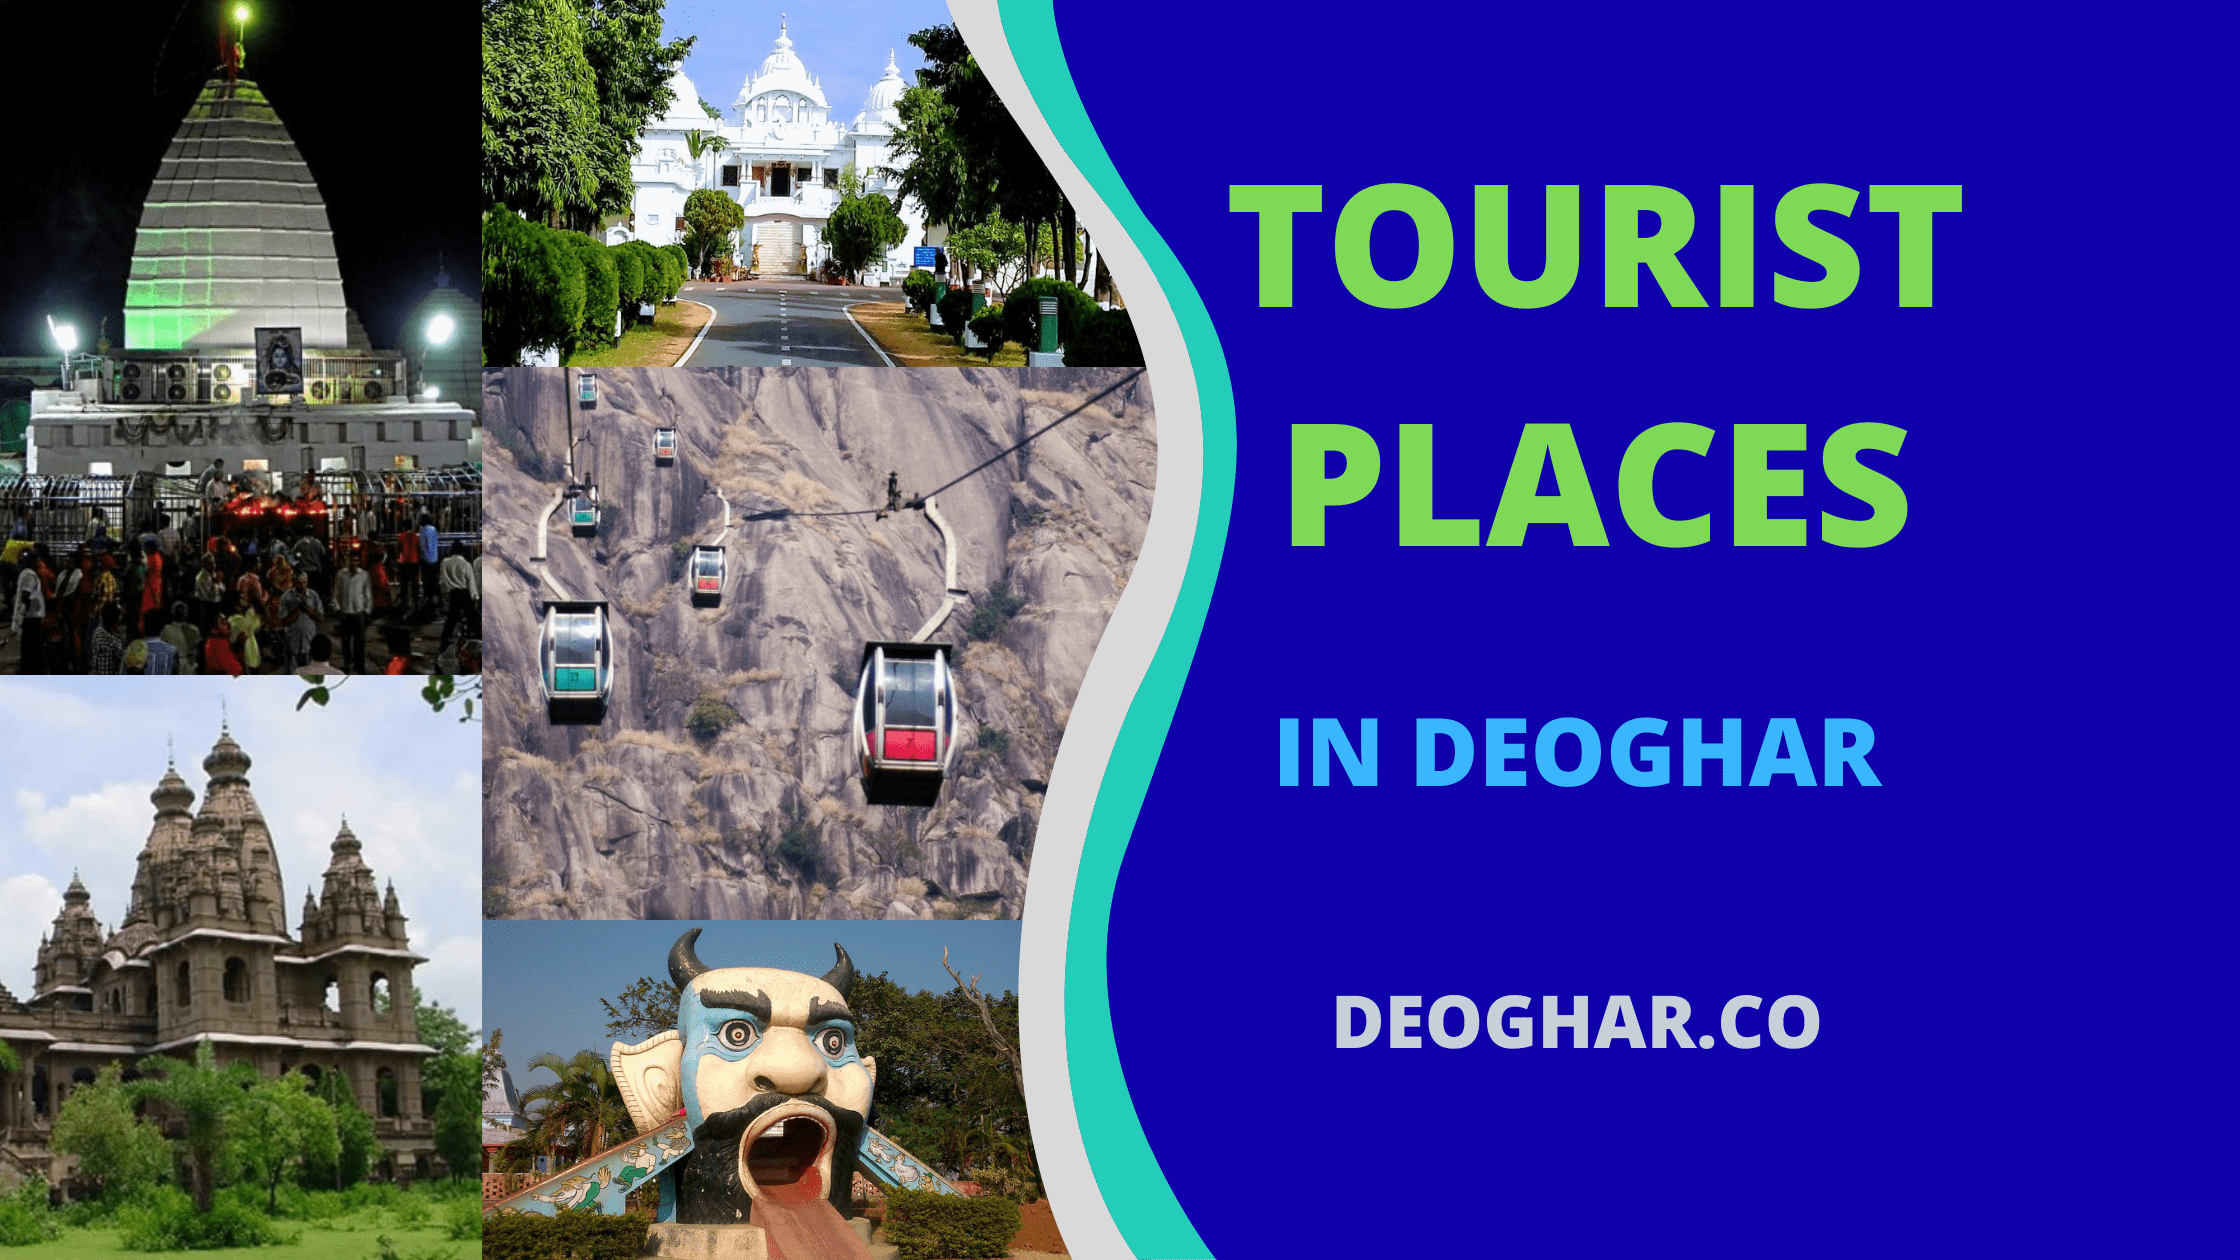 deoghar tour and travels